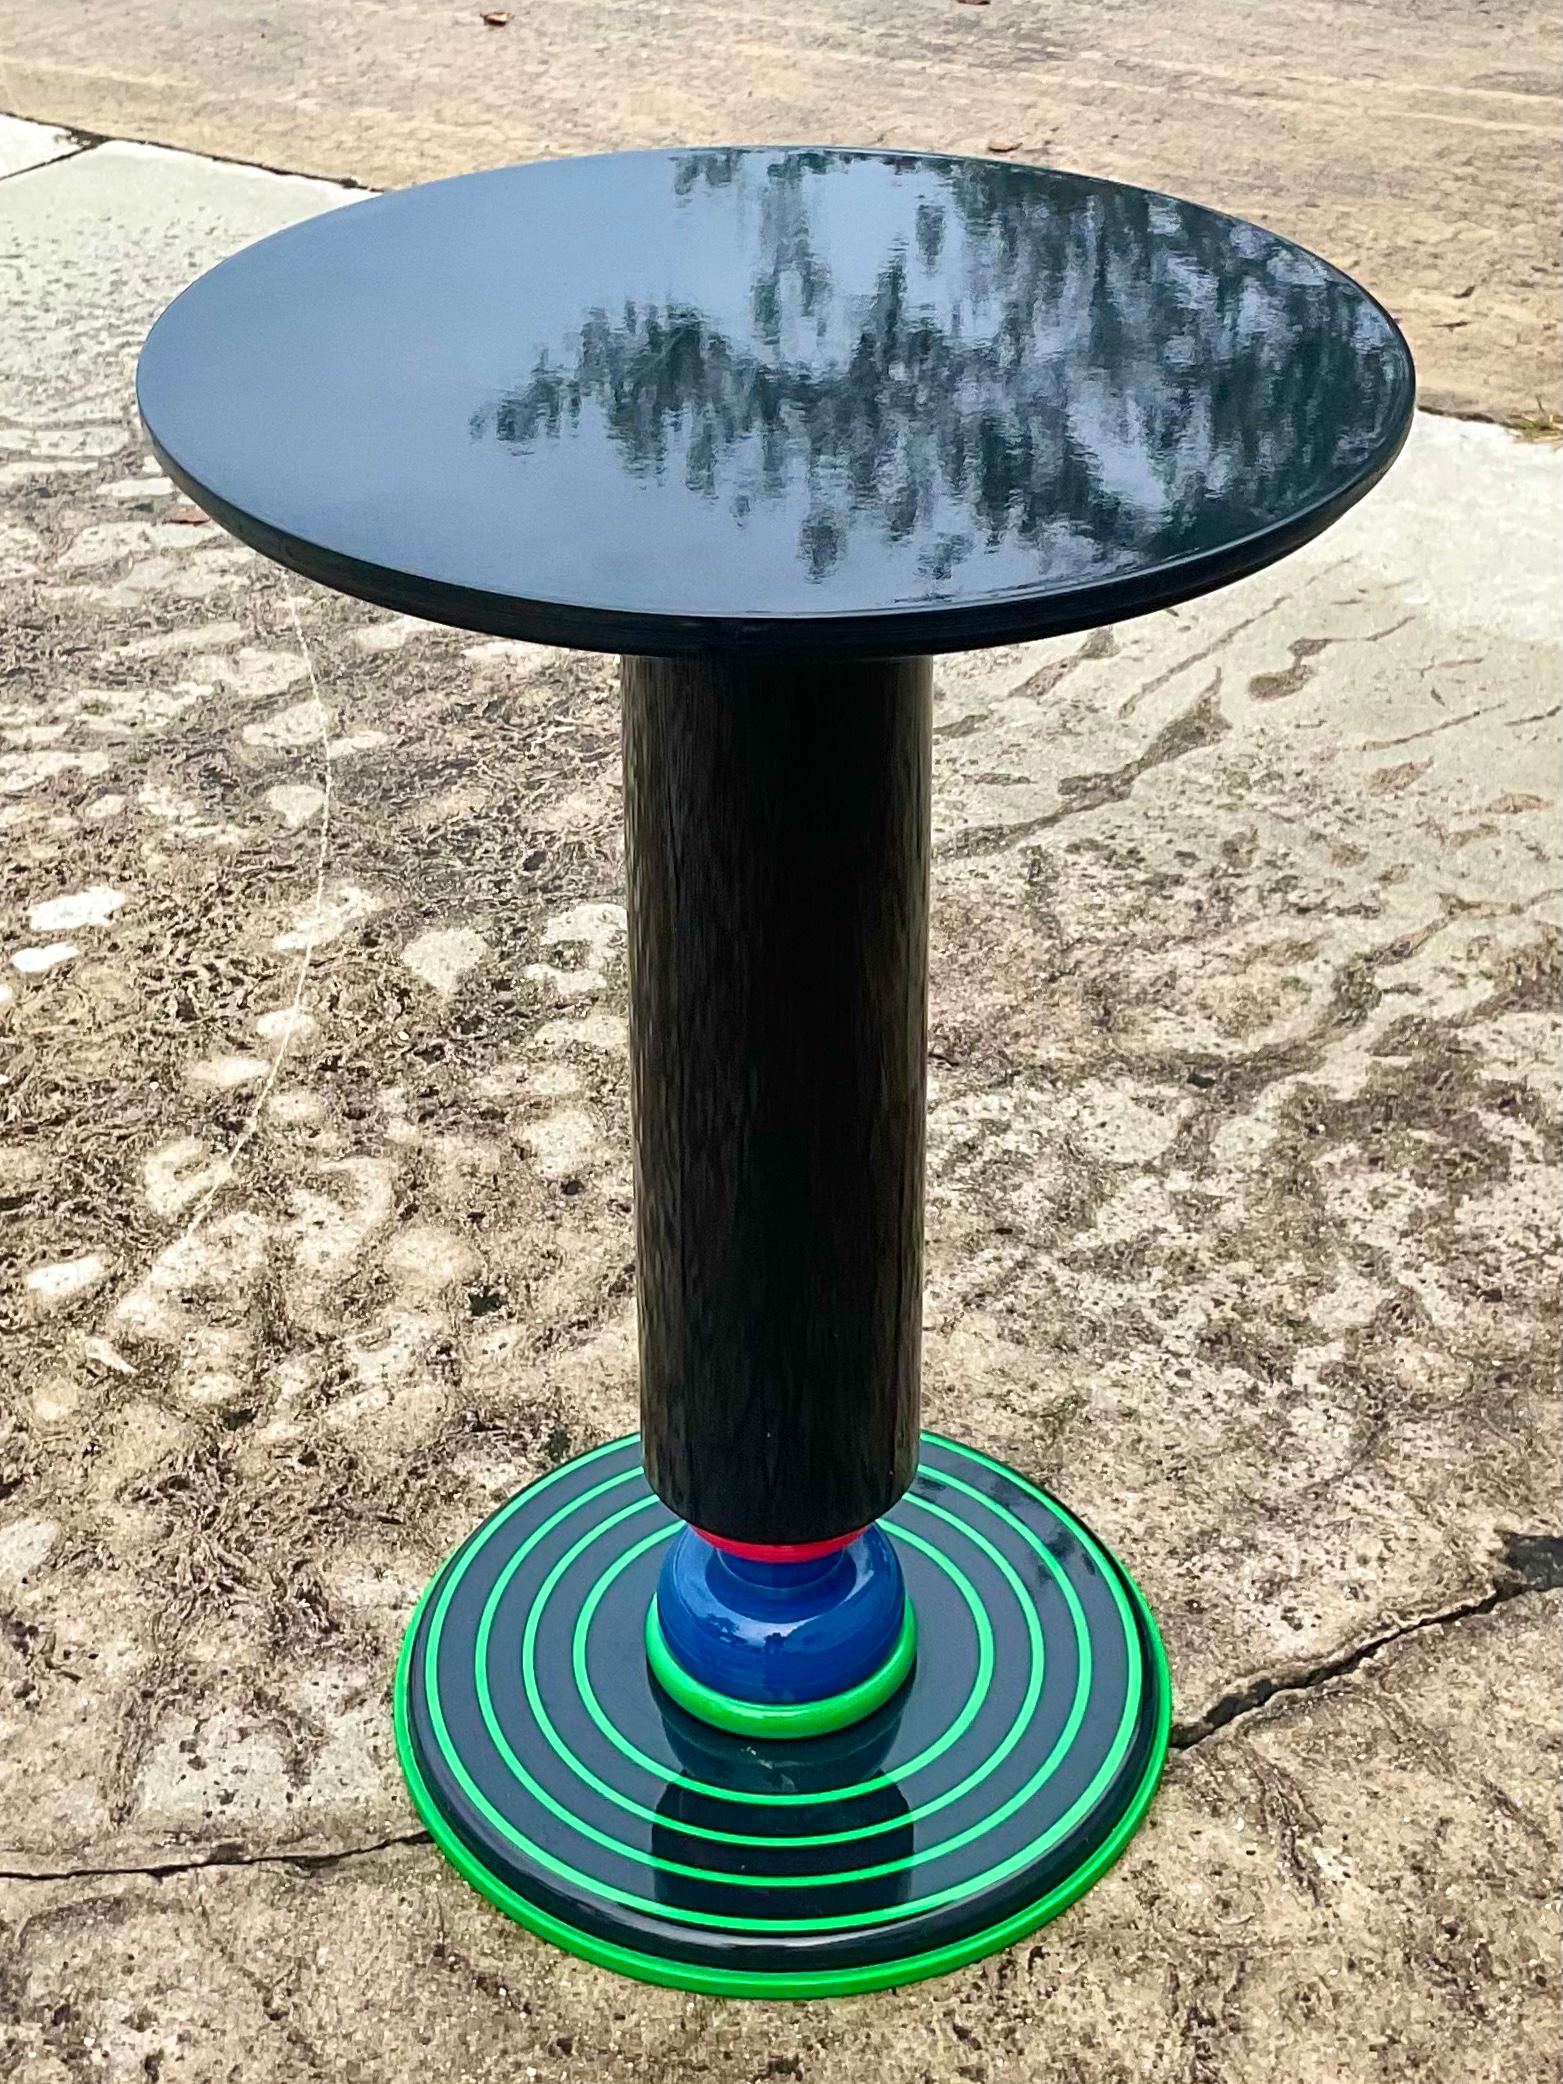 Incredible vintage Olivier Villatte drinks table. Beautiful high gloss black lacquered body with a chic acid green series if stripes on the bottom. Perfect to add that flash of color and drama to any decor. Acquired from a Palm Beach estate.